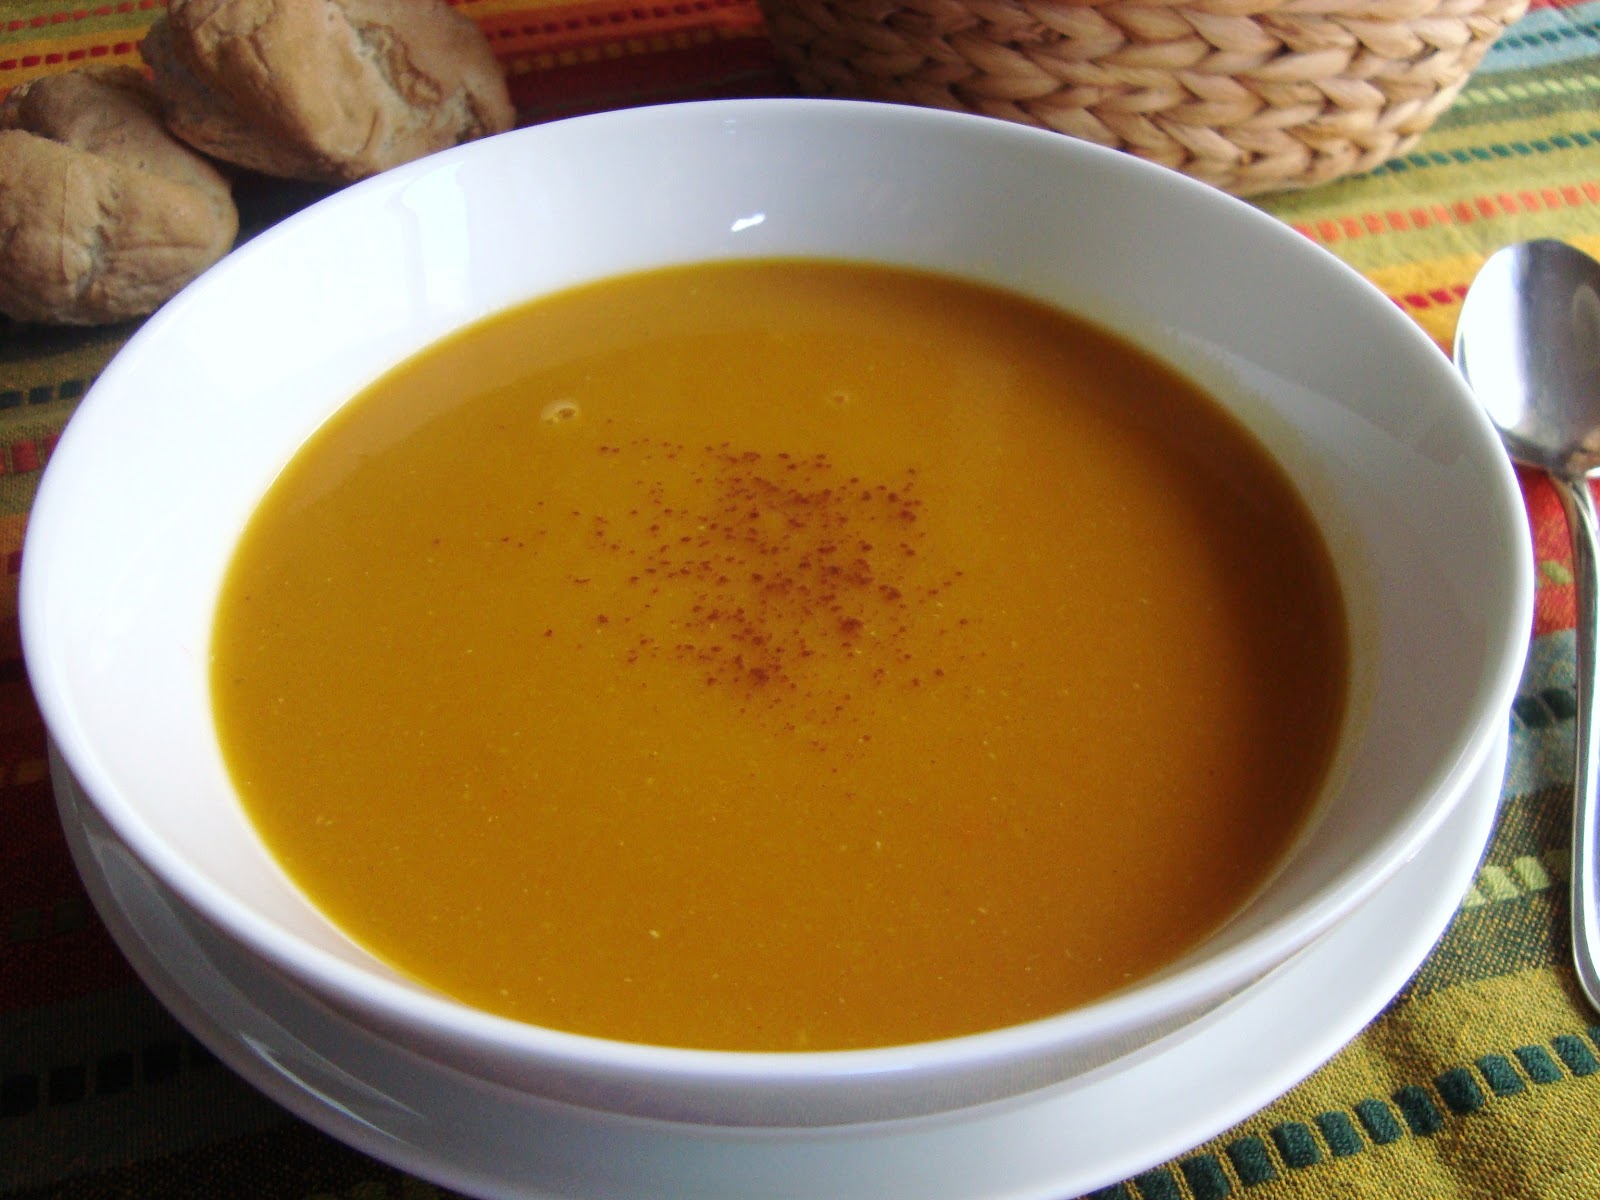 Pocketfuls: Butternut squash and red lentil soup (dairy-free)